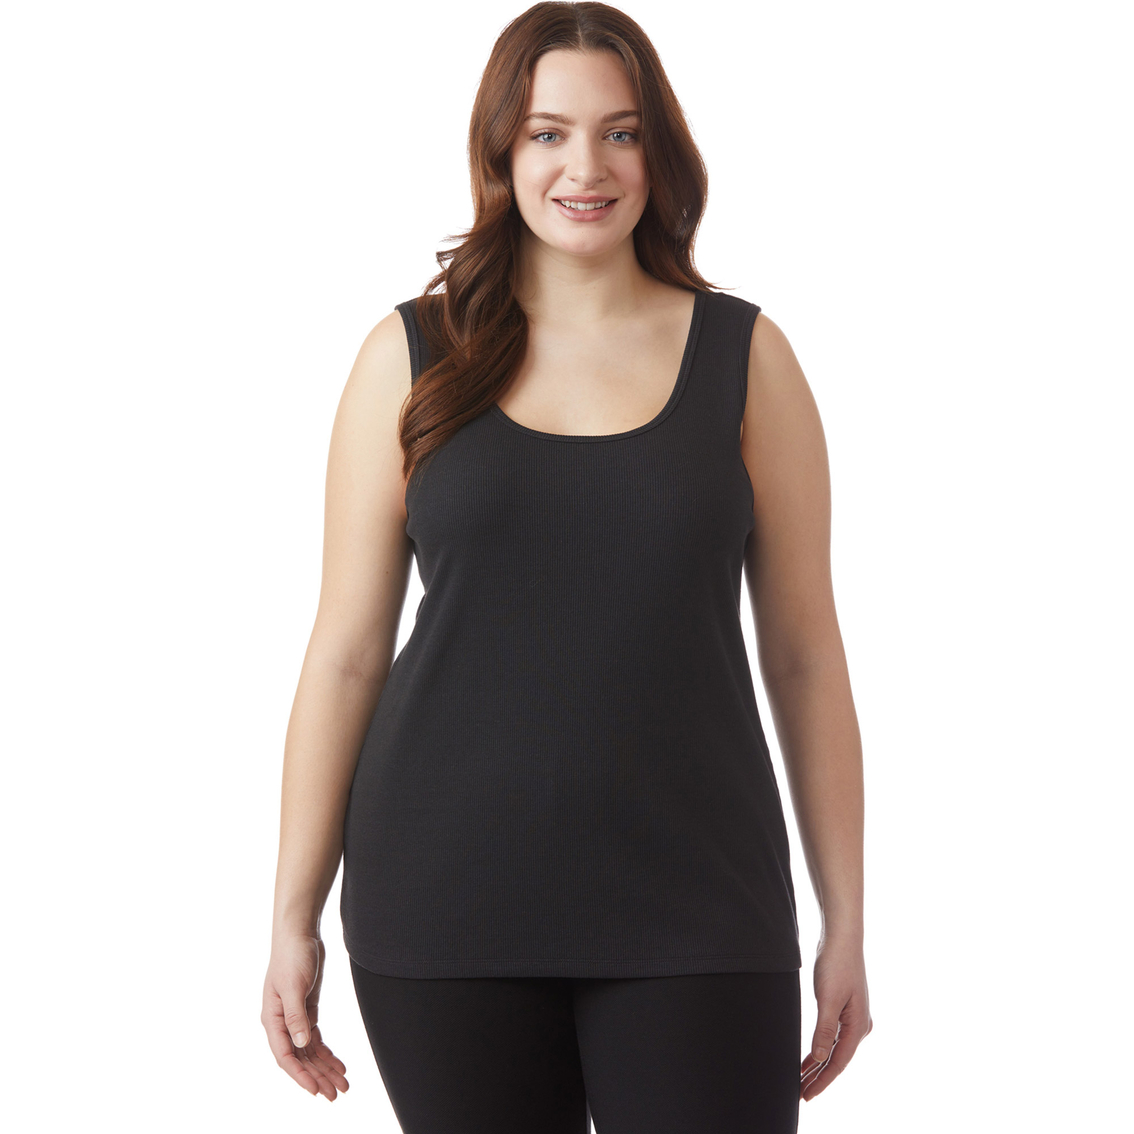 Jw Plus Size Ribbed Knit Tank Top | Tops | Clothing & Accessories ...